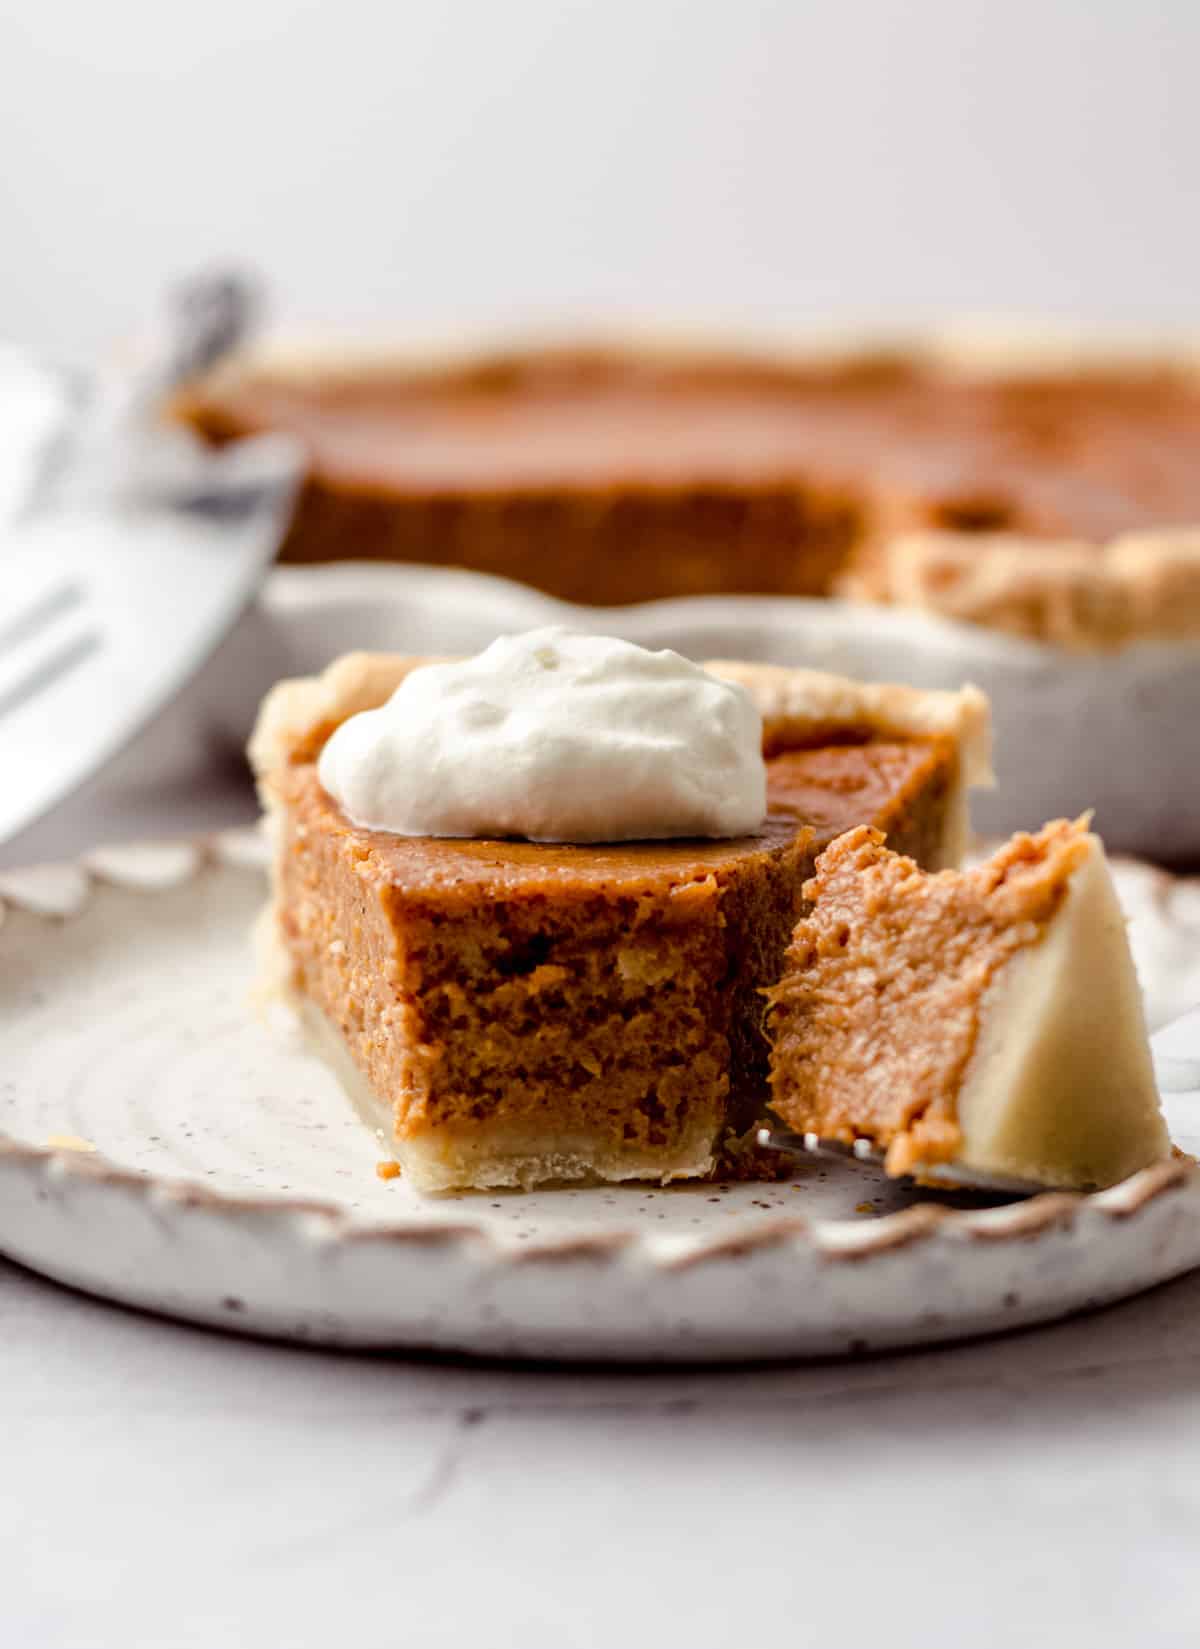 A slice of homemade pie topped with whipped cream.